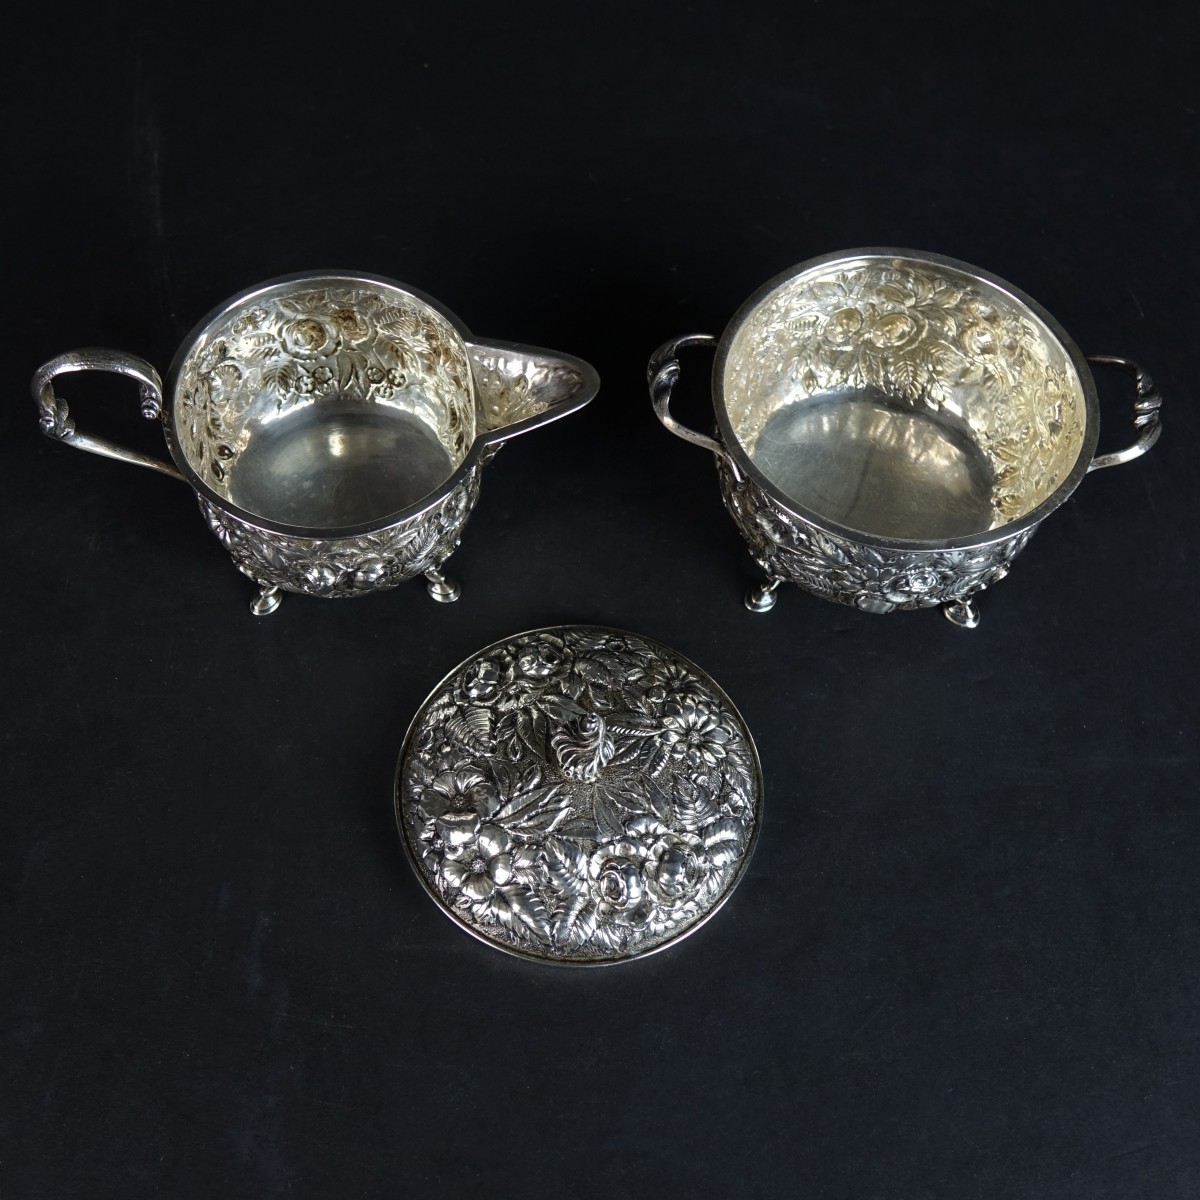 Sterling Silver Creamer and Covered Sugar